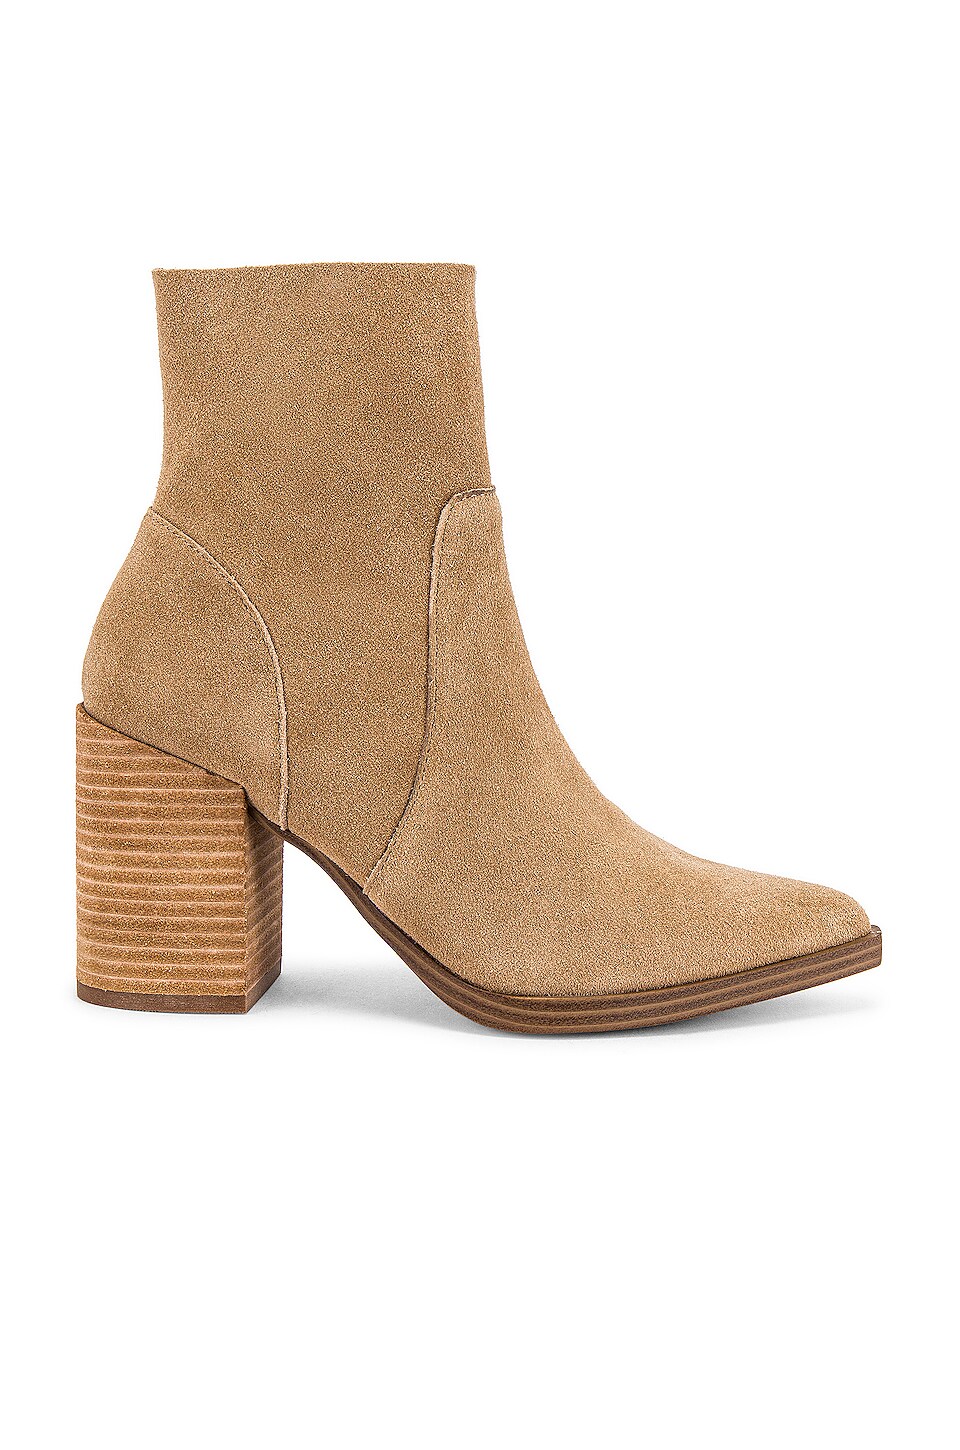 Steve Madden Calabria Boot in Sand Suede | REVOLVE